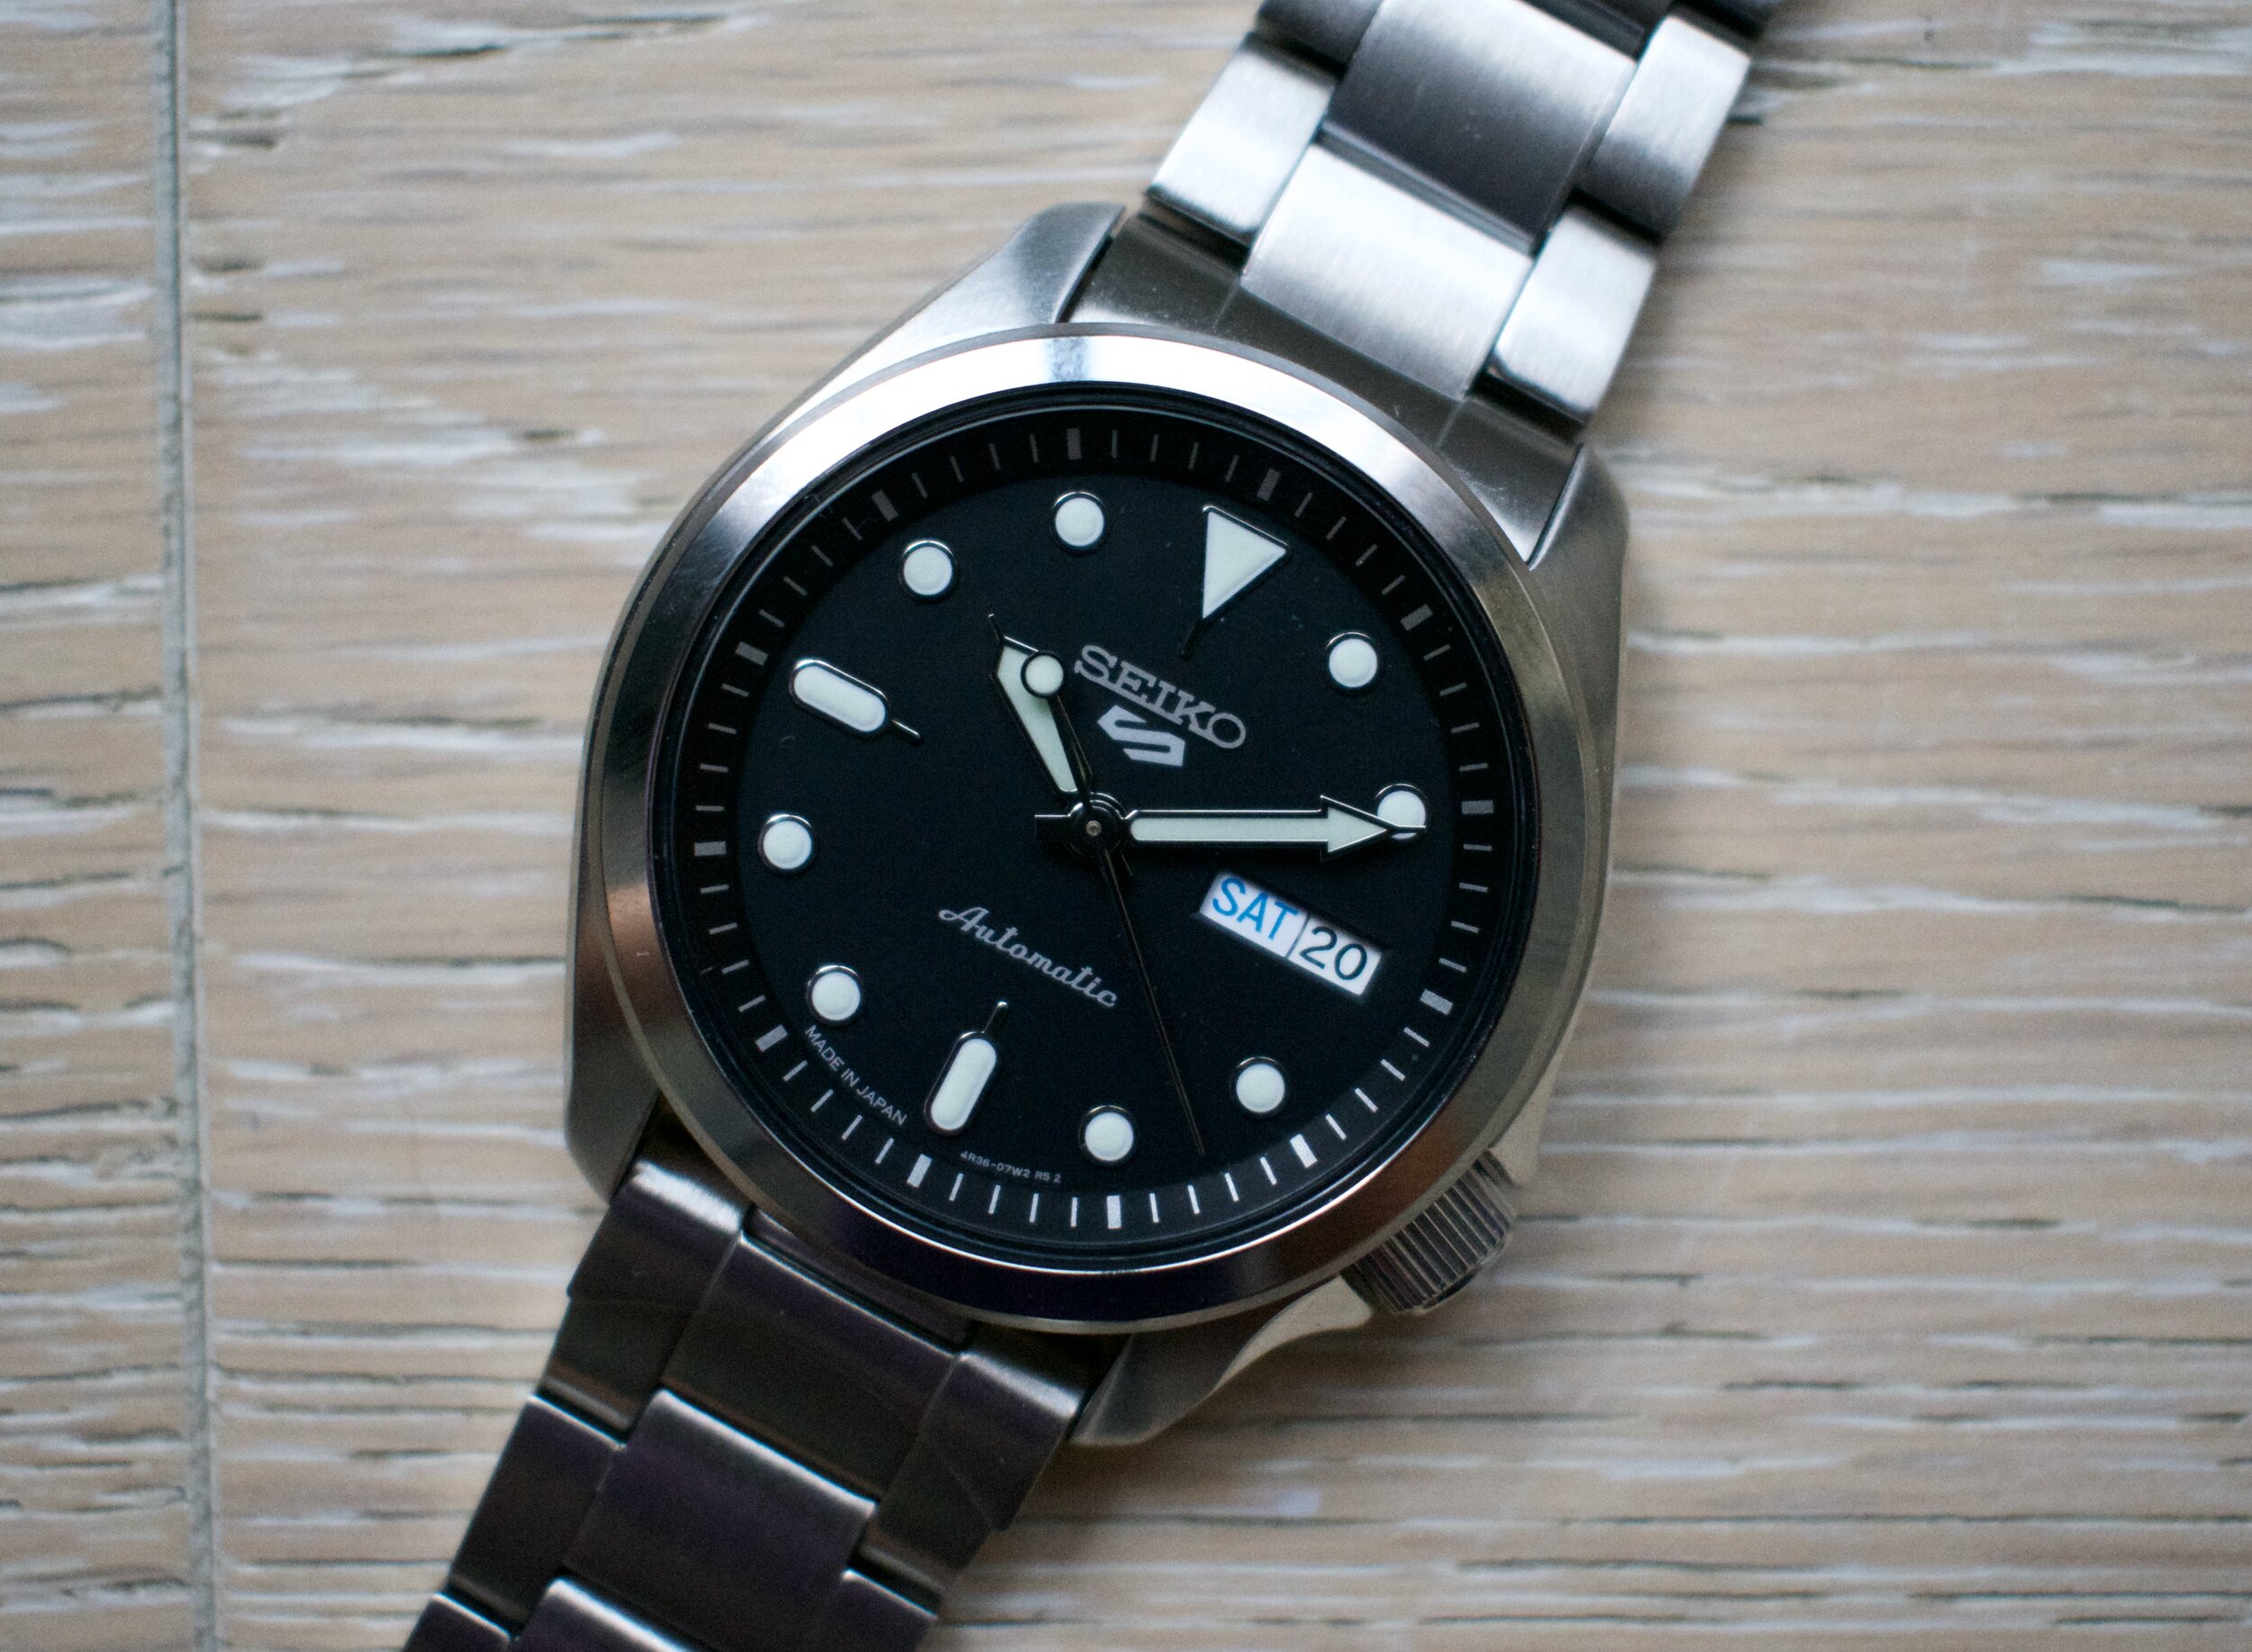 Seiko 5 Sports: The most important 